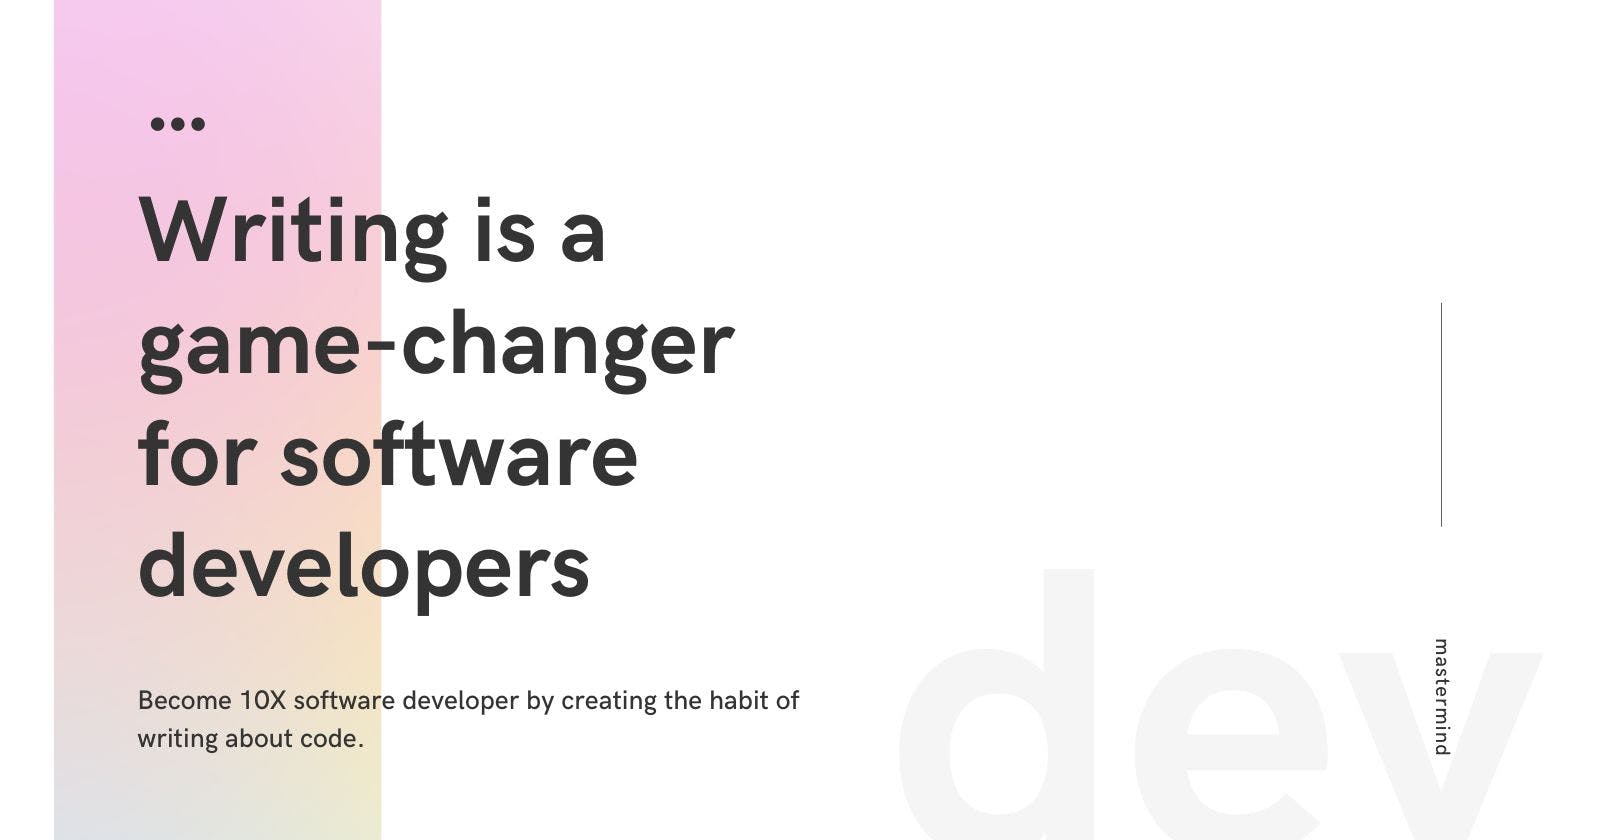 Writing is a game-changer for every software developer